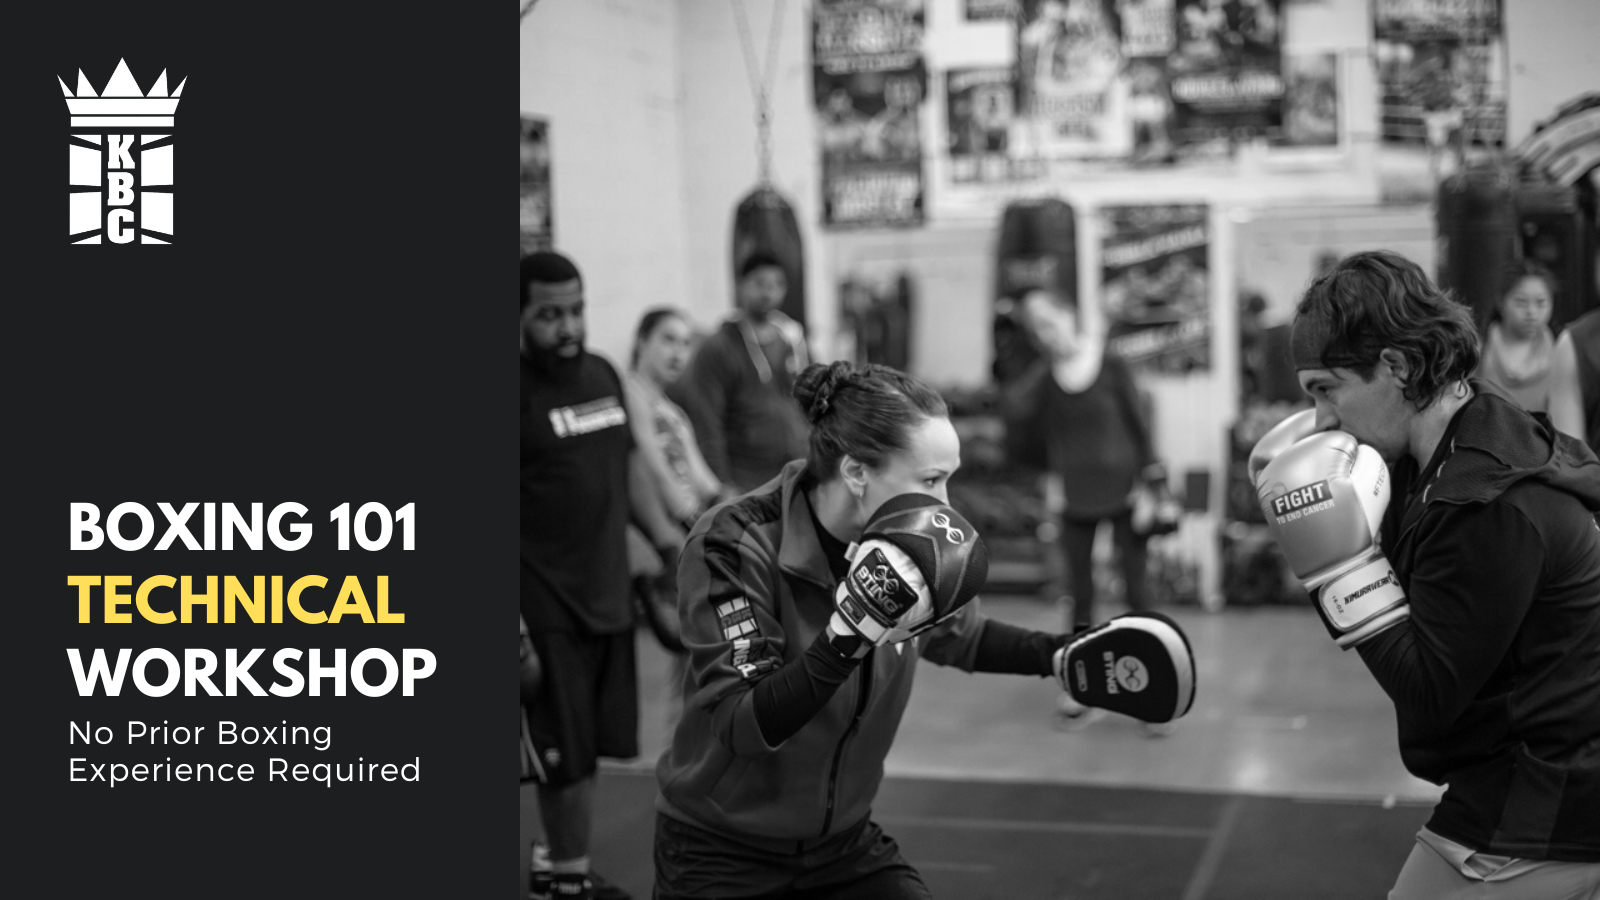 👊 BOXING 101 WORKSHOPS ARE HERE! LIMTED SPOTS AVAILABLE…